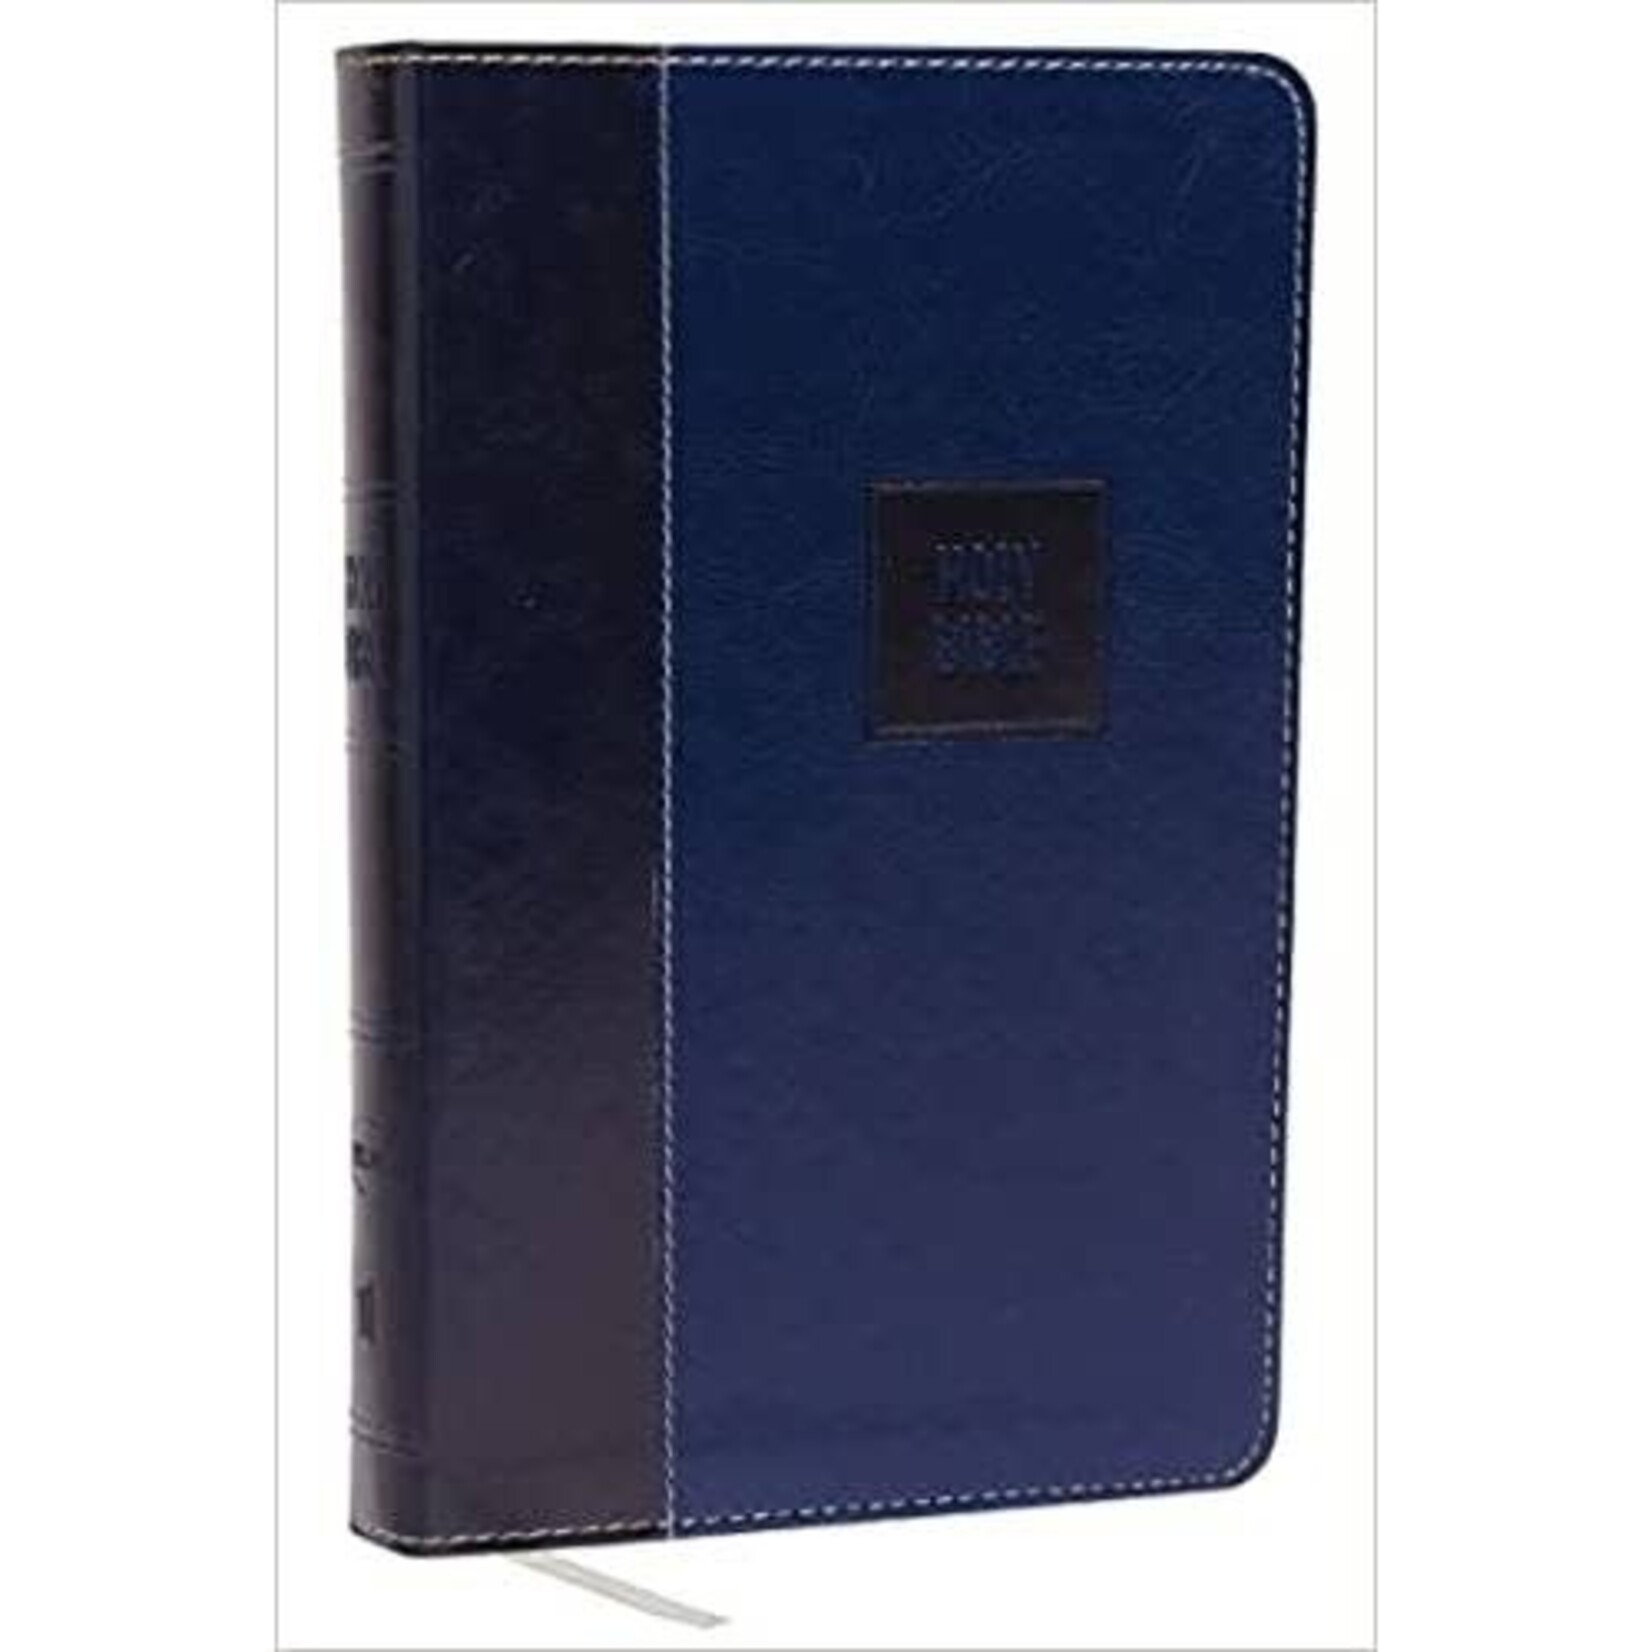 Holy Bible (NKJV) New King James Version Deluxe Gift Bible - Navy Leathersoft